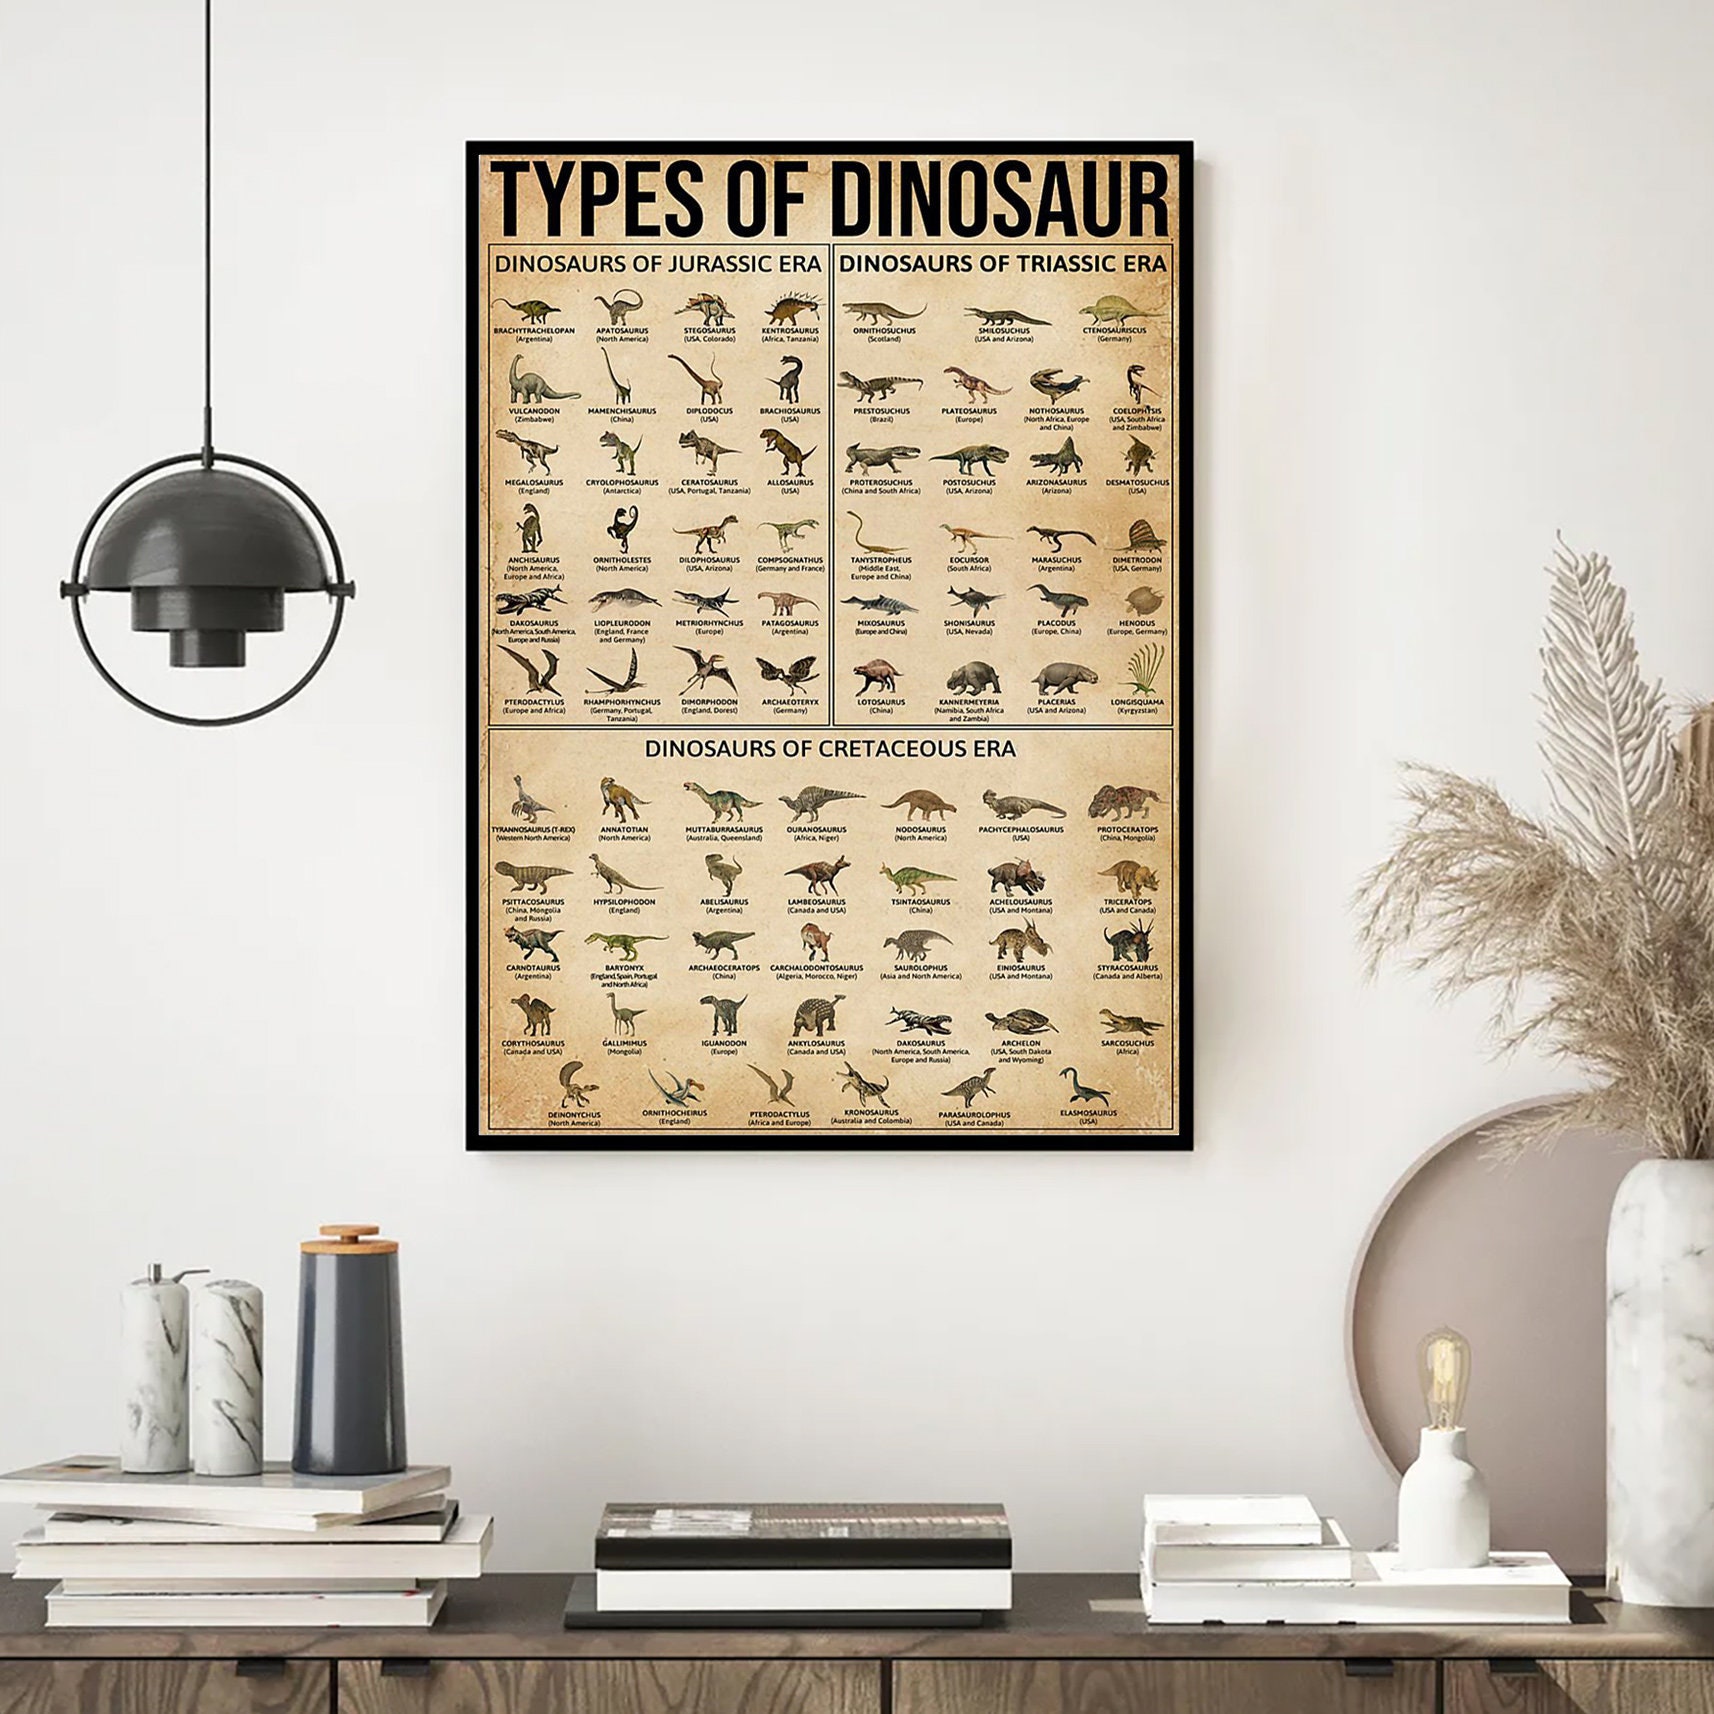 Discover Types Of Dinosaur Poster, Dinosaur Poster, Knowledge Poster, Dinosaurs Wall Hanging, Dinosaur Art Print, Dinosaur Decor, Dinosaur Wall Art